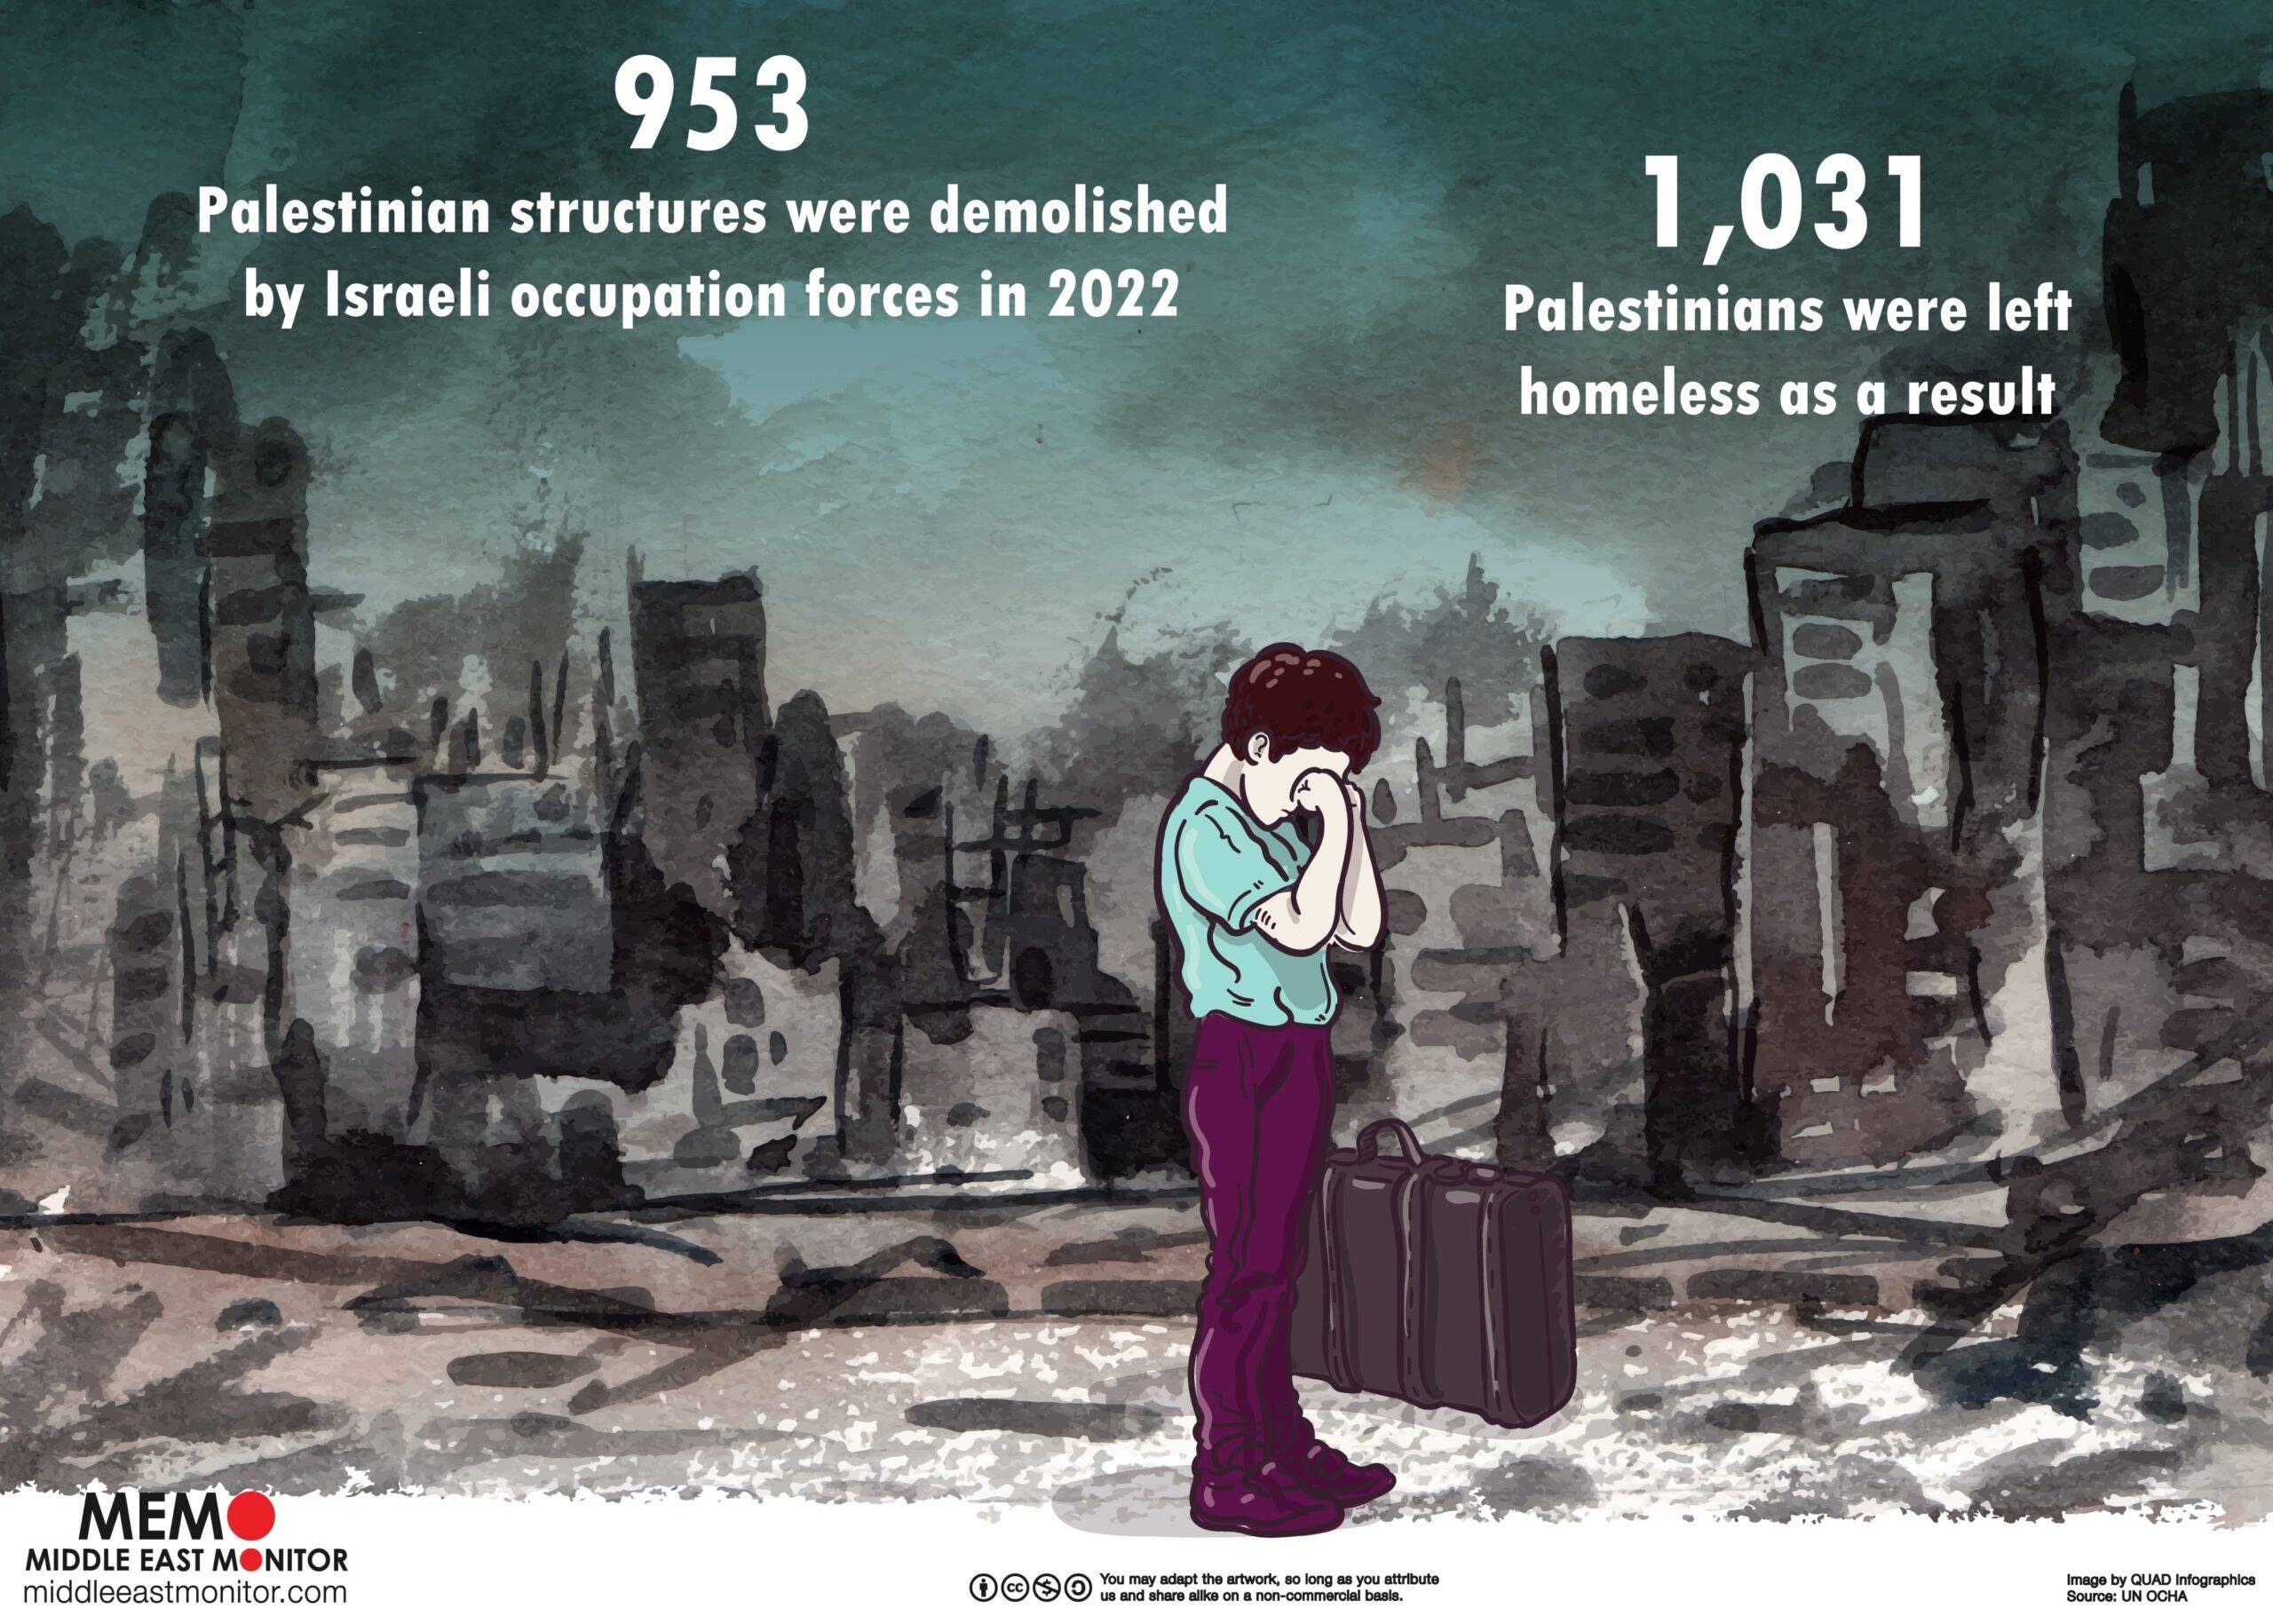 Infographic - Demolition of Palestinian Property